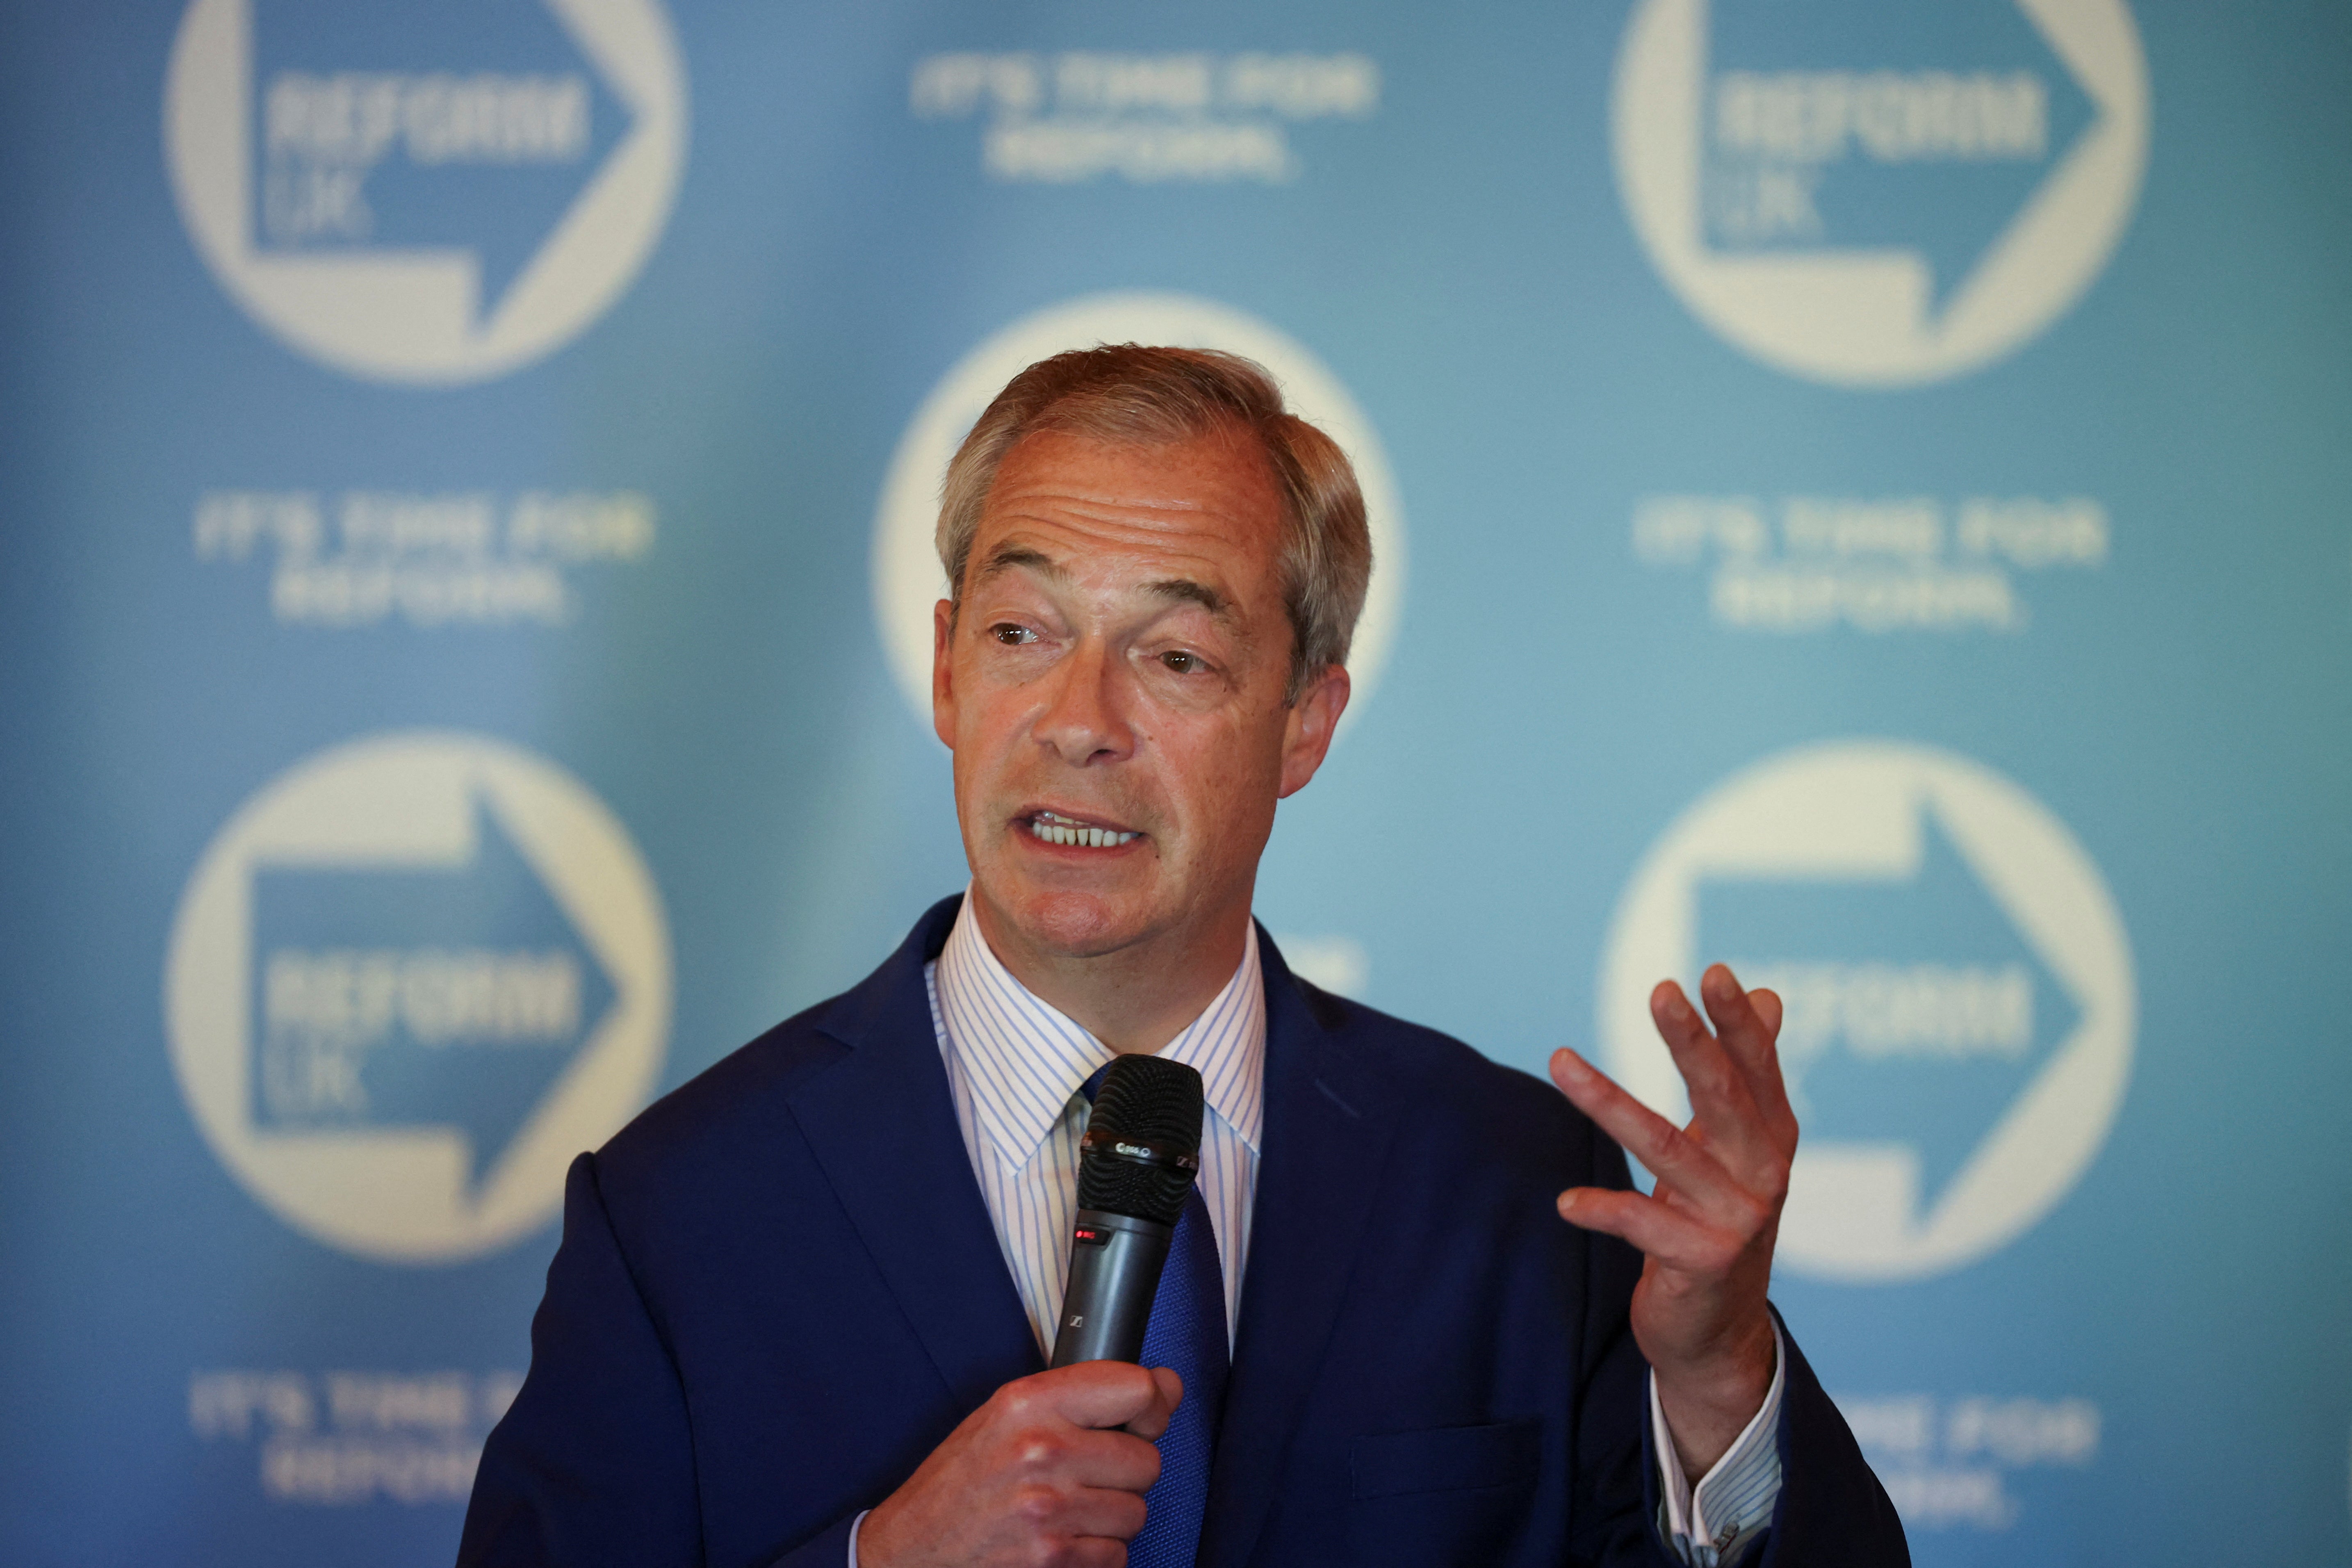 The criticism comes as Mr Farage faces questions about some of his candidates’ views